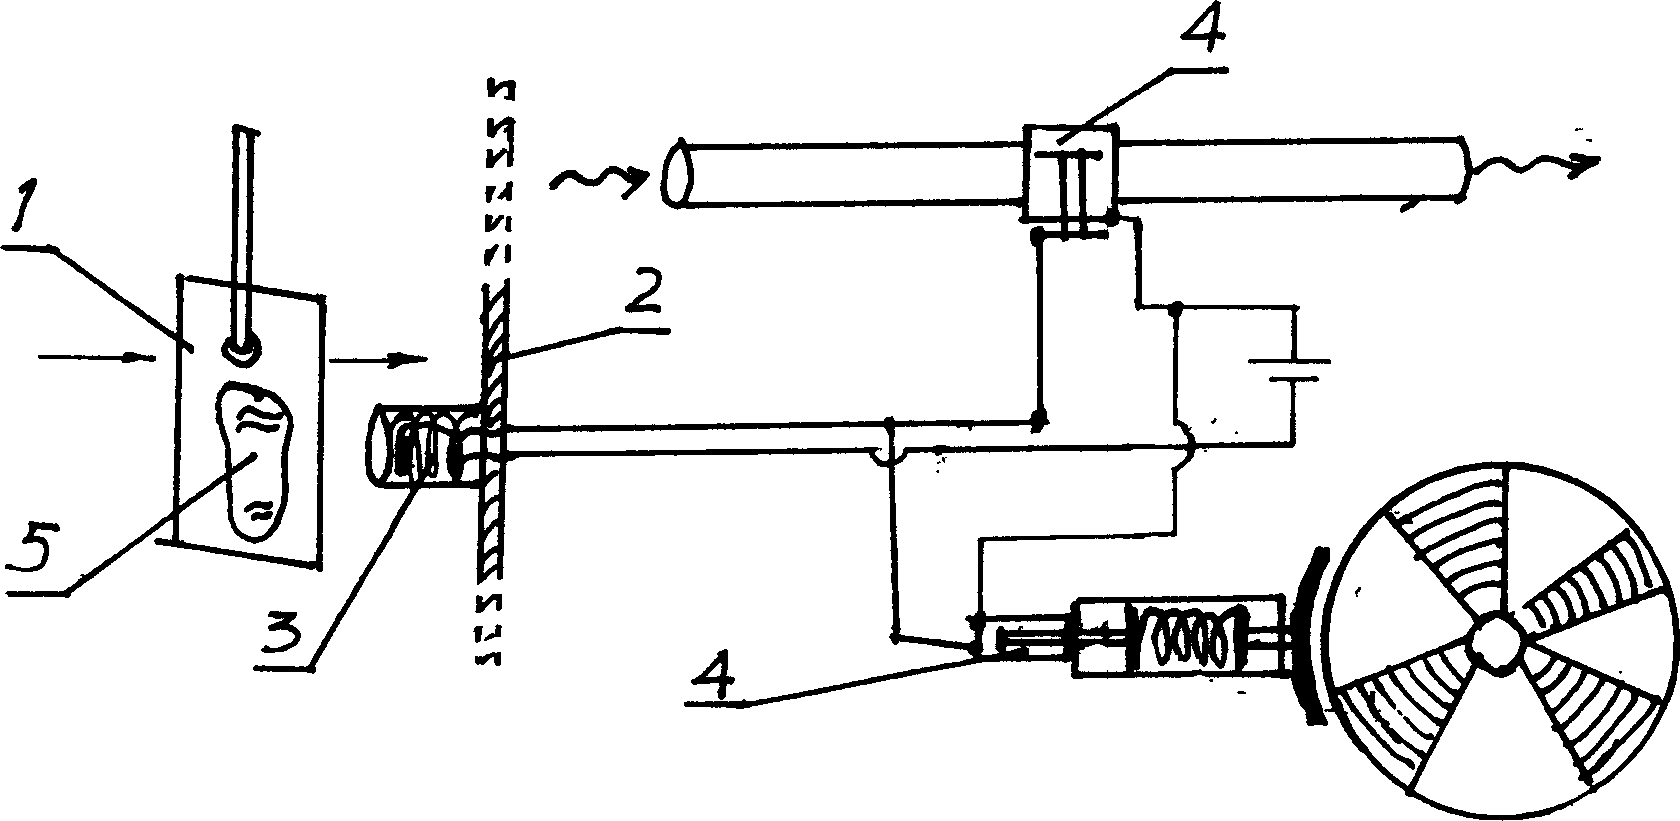 Throttle system device with annunciator